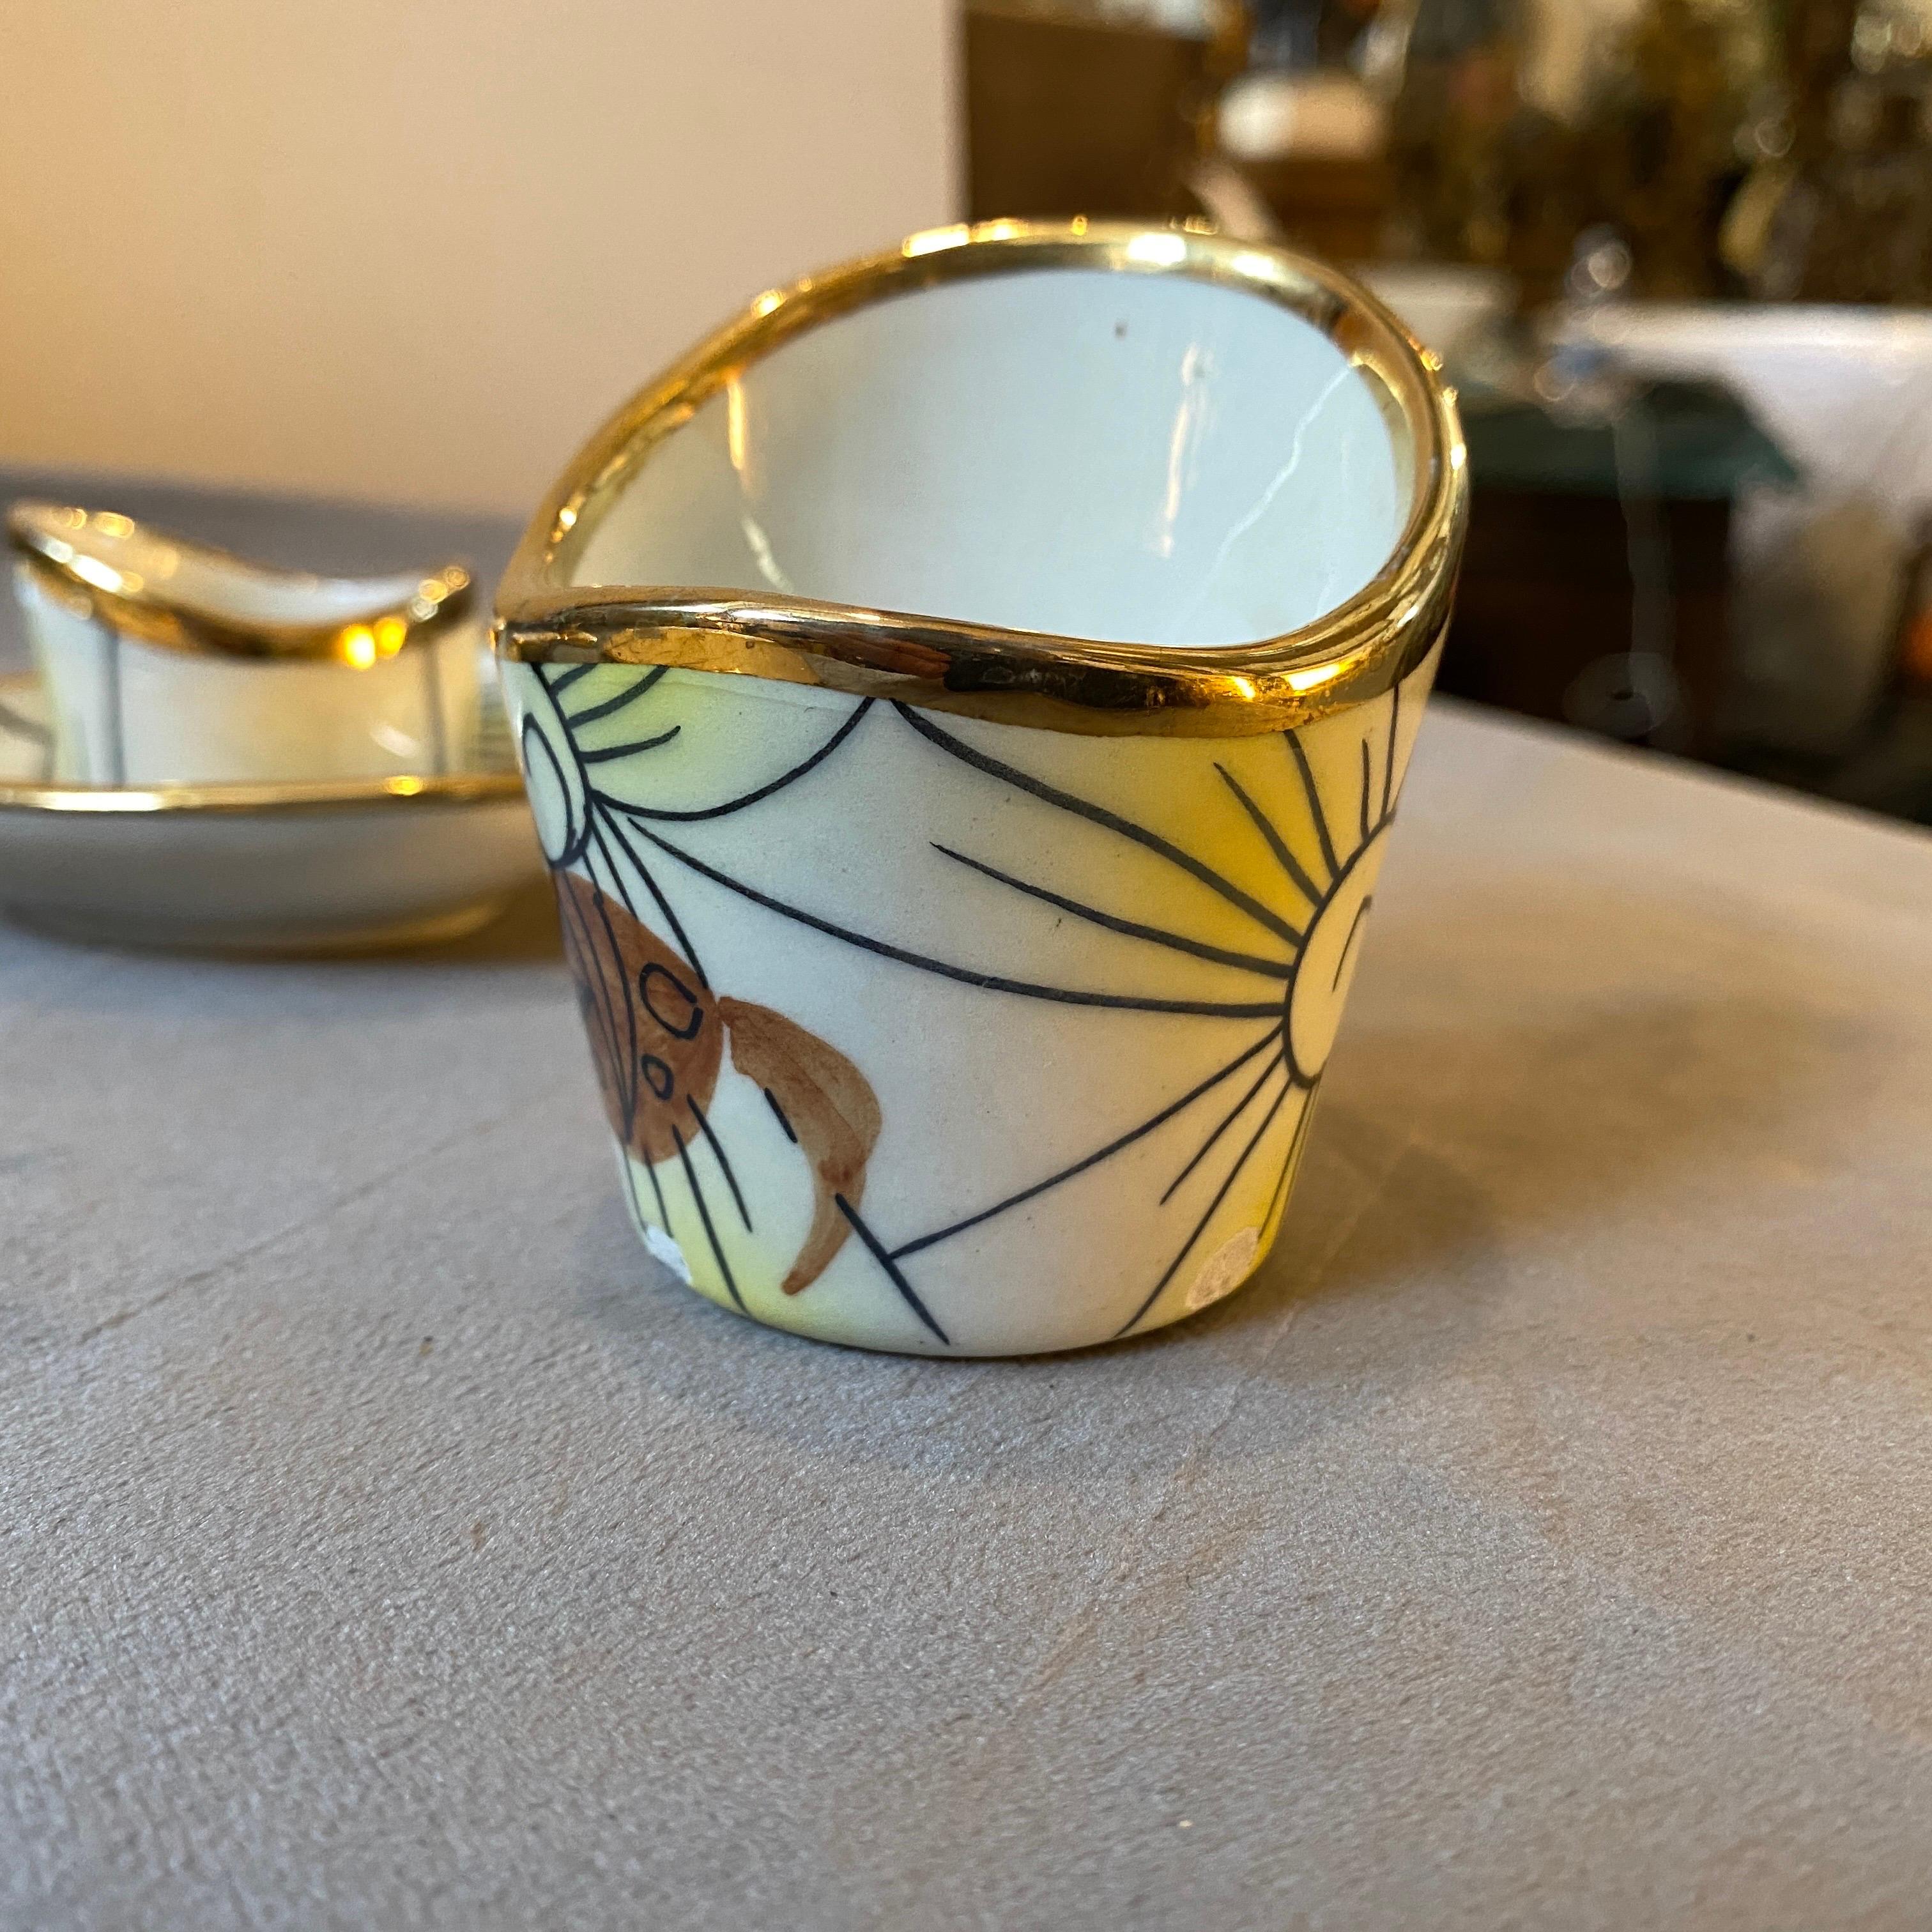 Hand-Crafted 1950s, Mid-Century Modern Ceramic Italian Smoking Set by Alfa Ceramiche For Sale